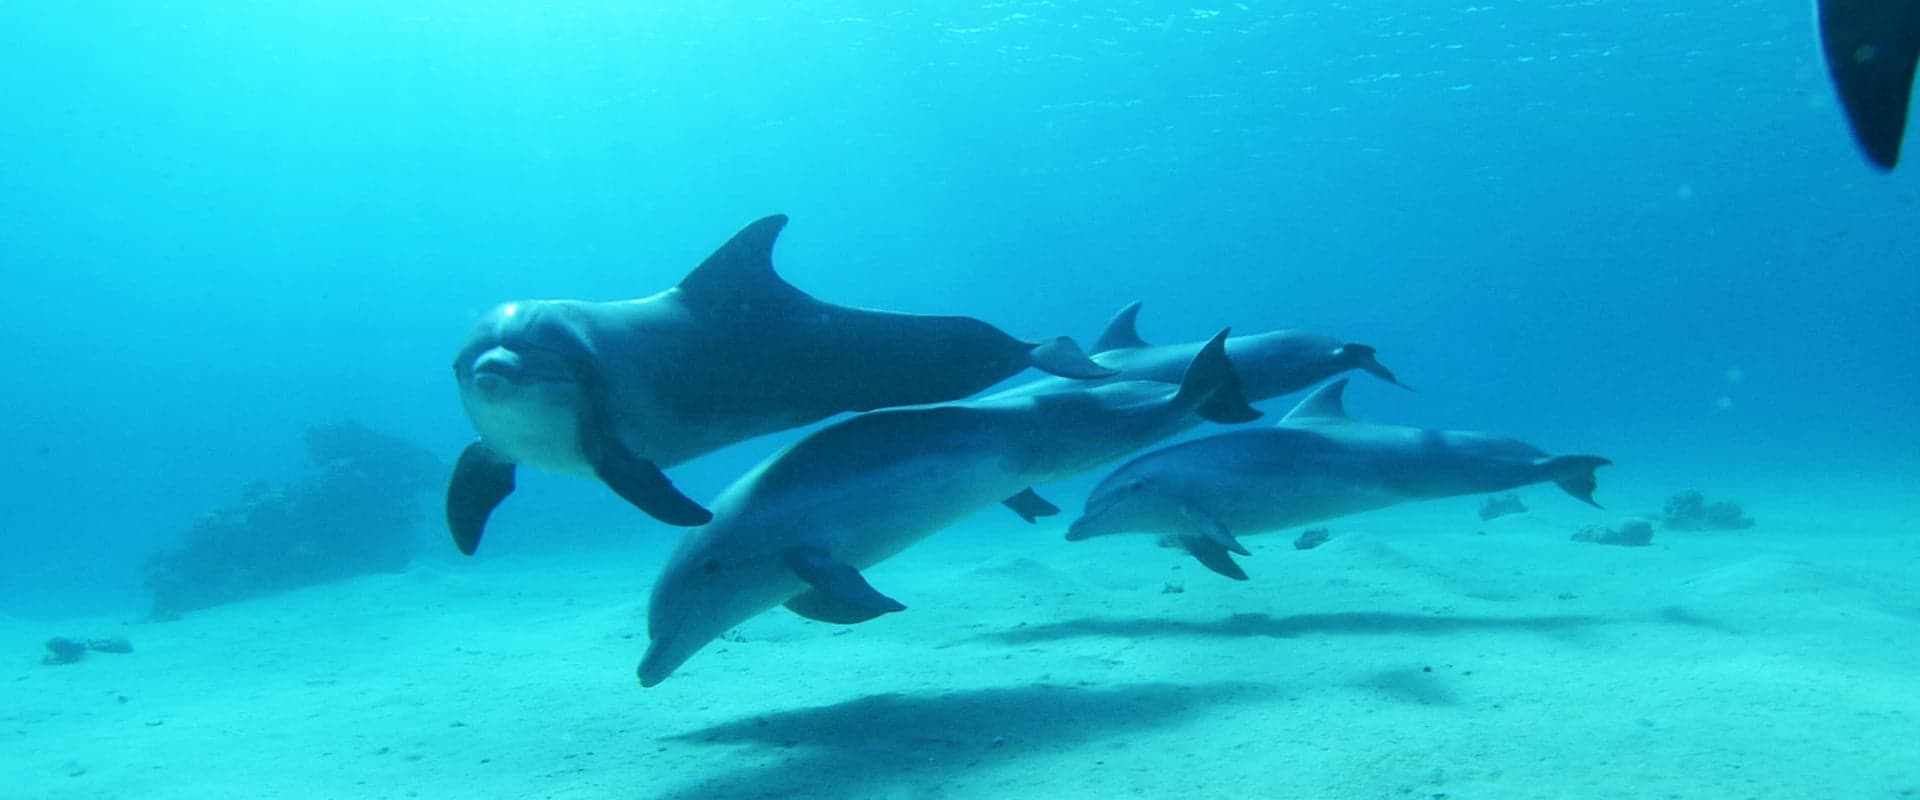 Dolphins in the Deep Blue Ocean